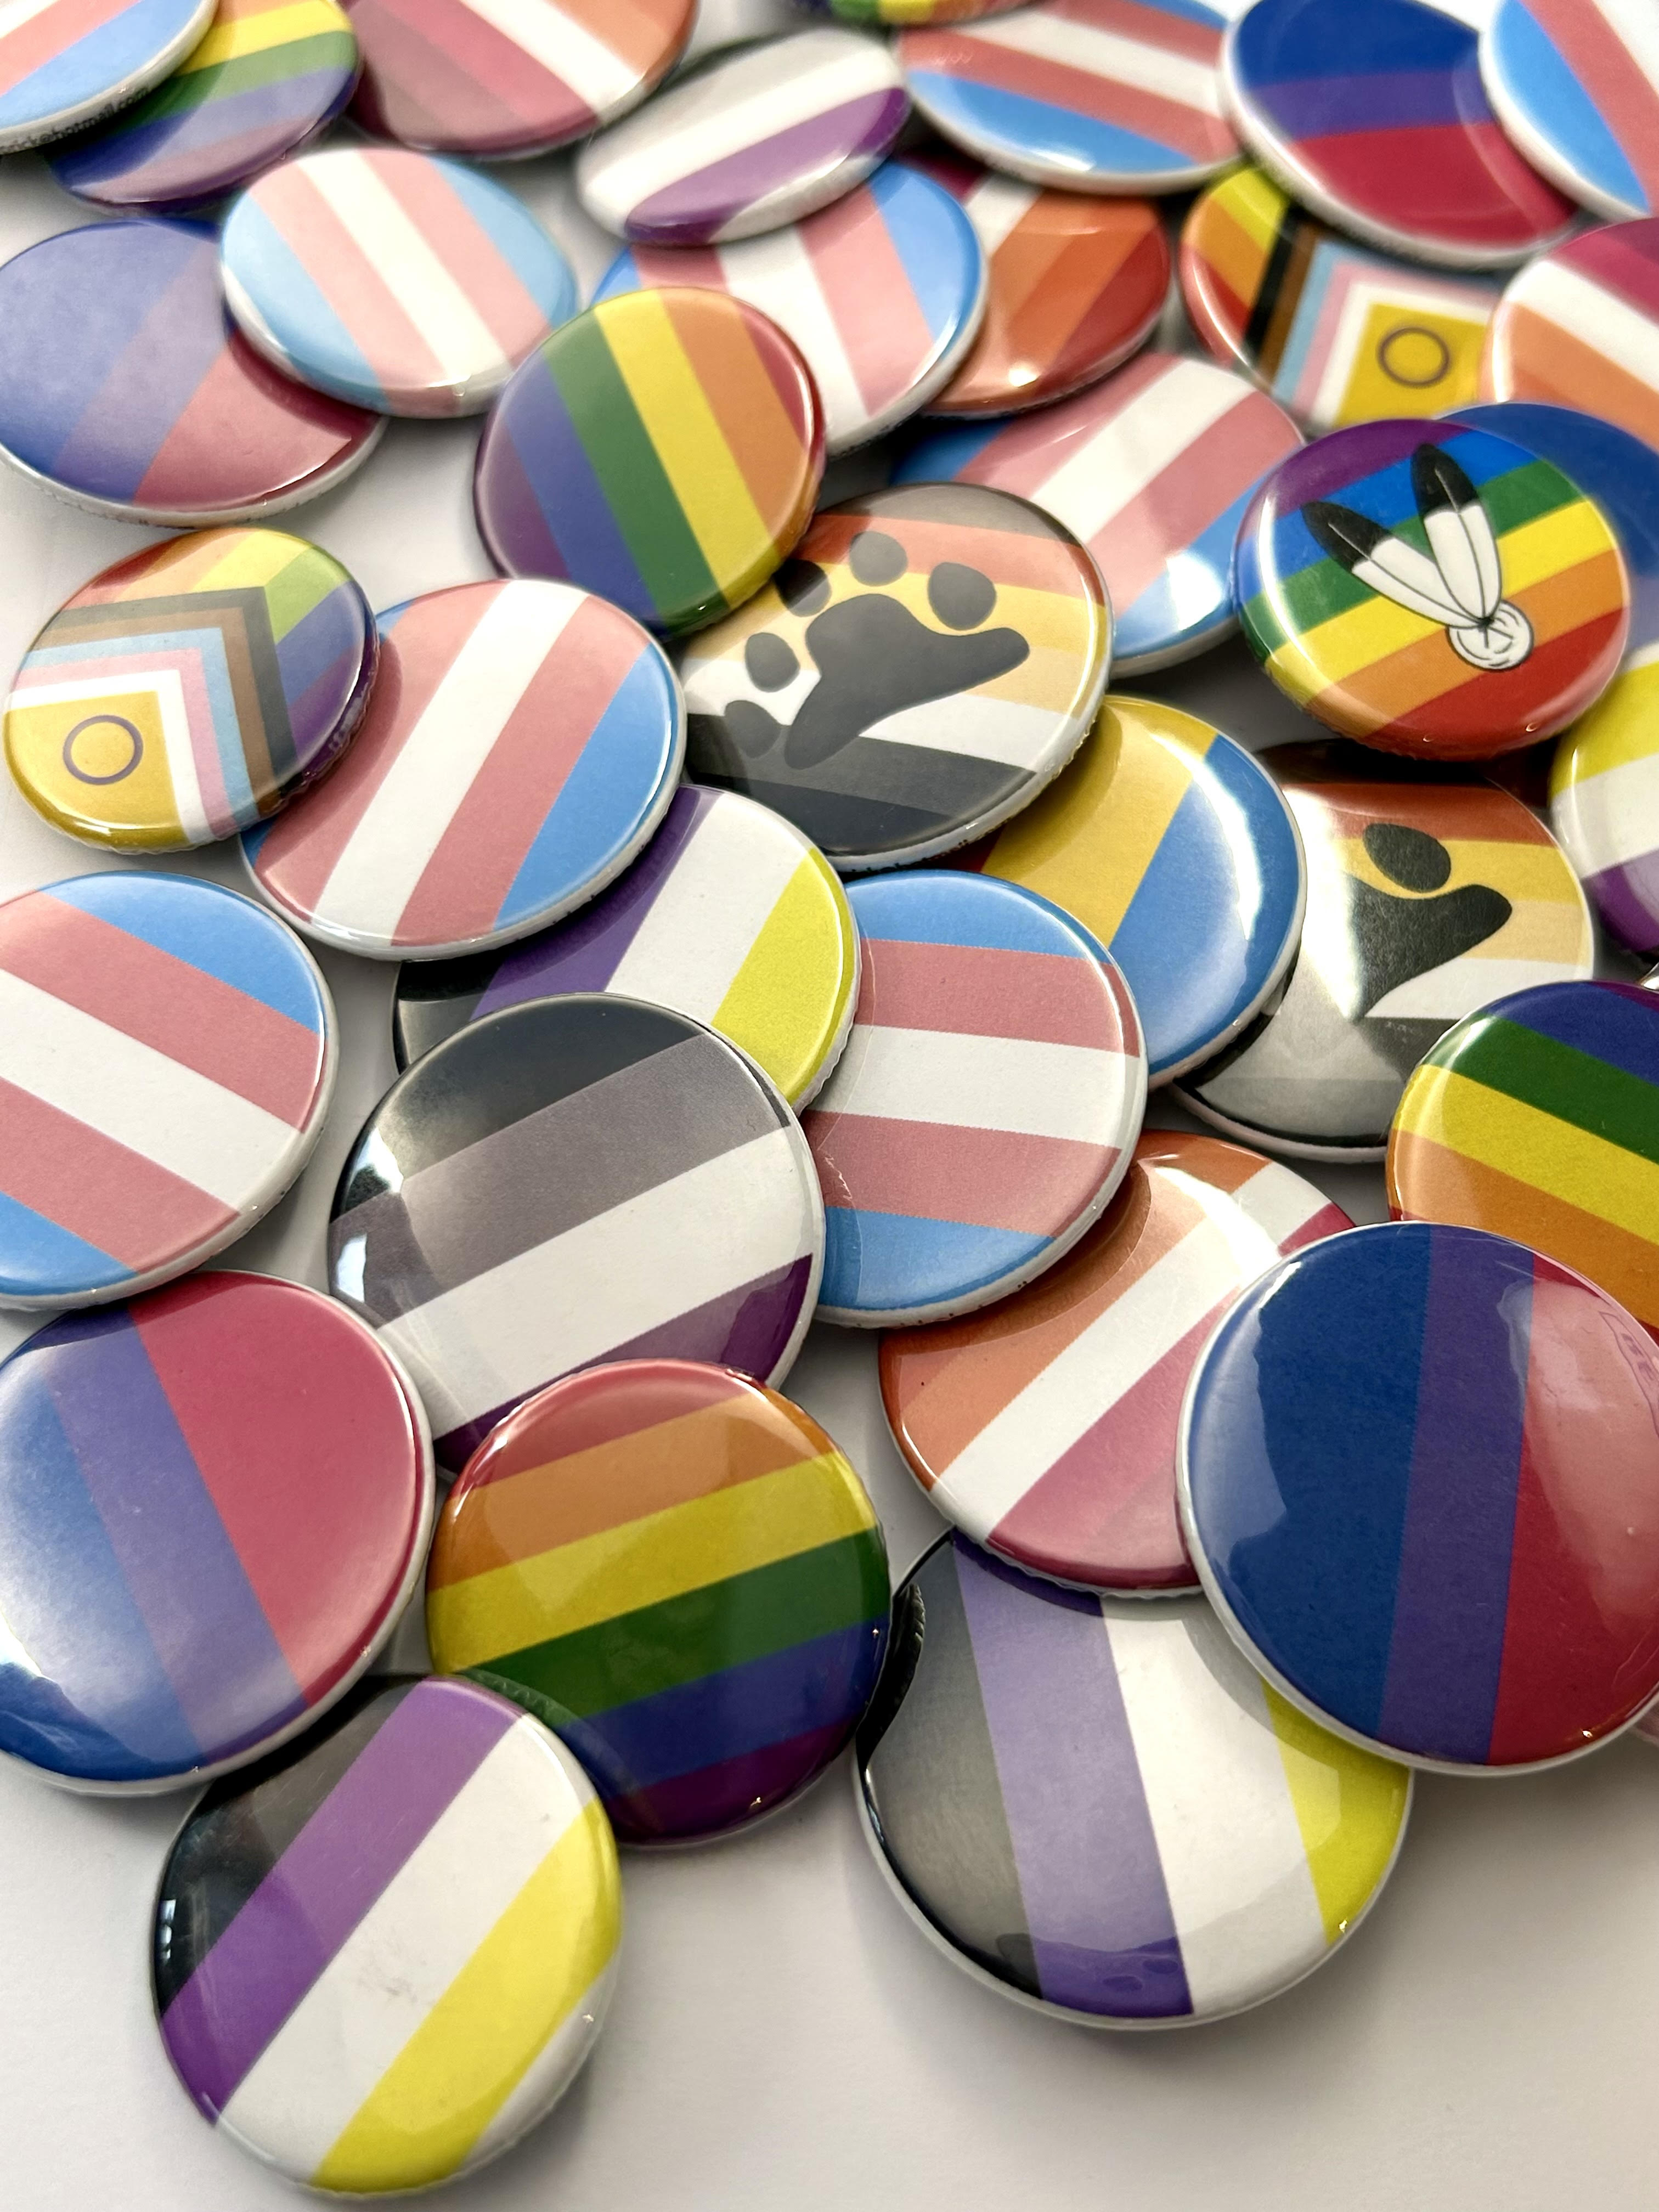 An assortment of round buttons with different Pride flags on them are scattered across a white background.